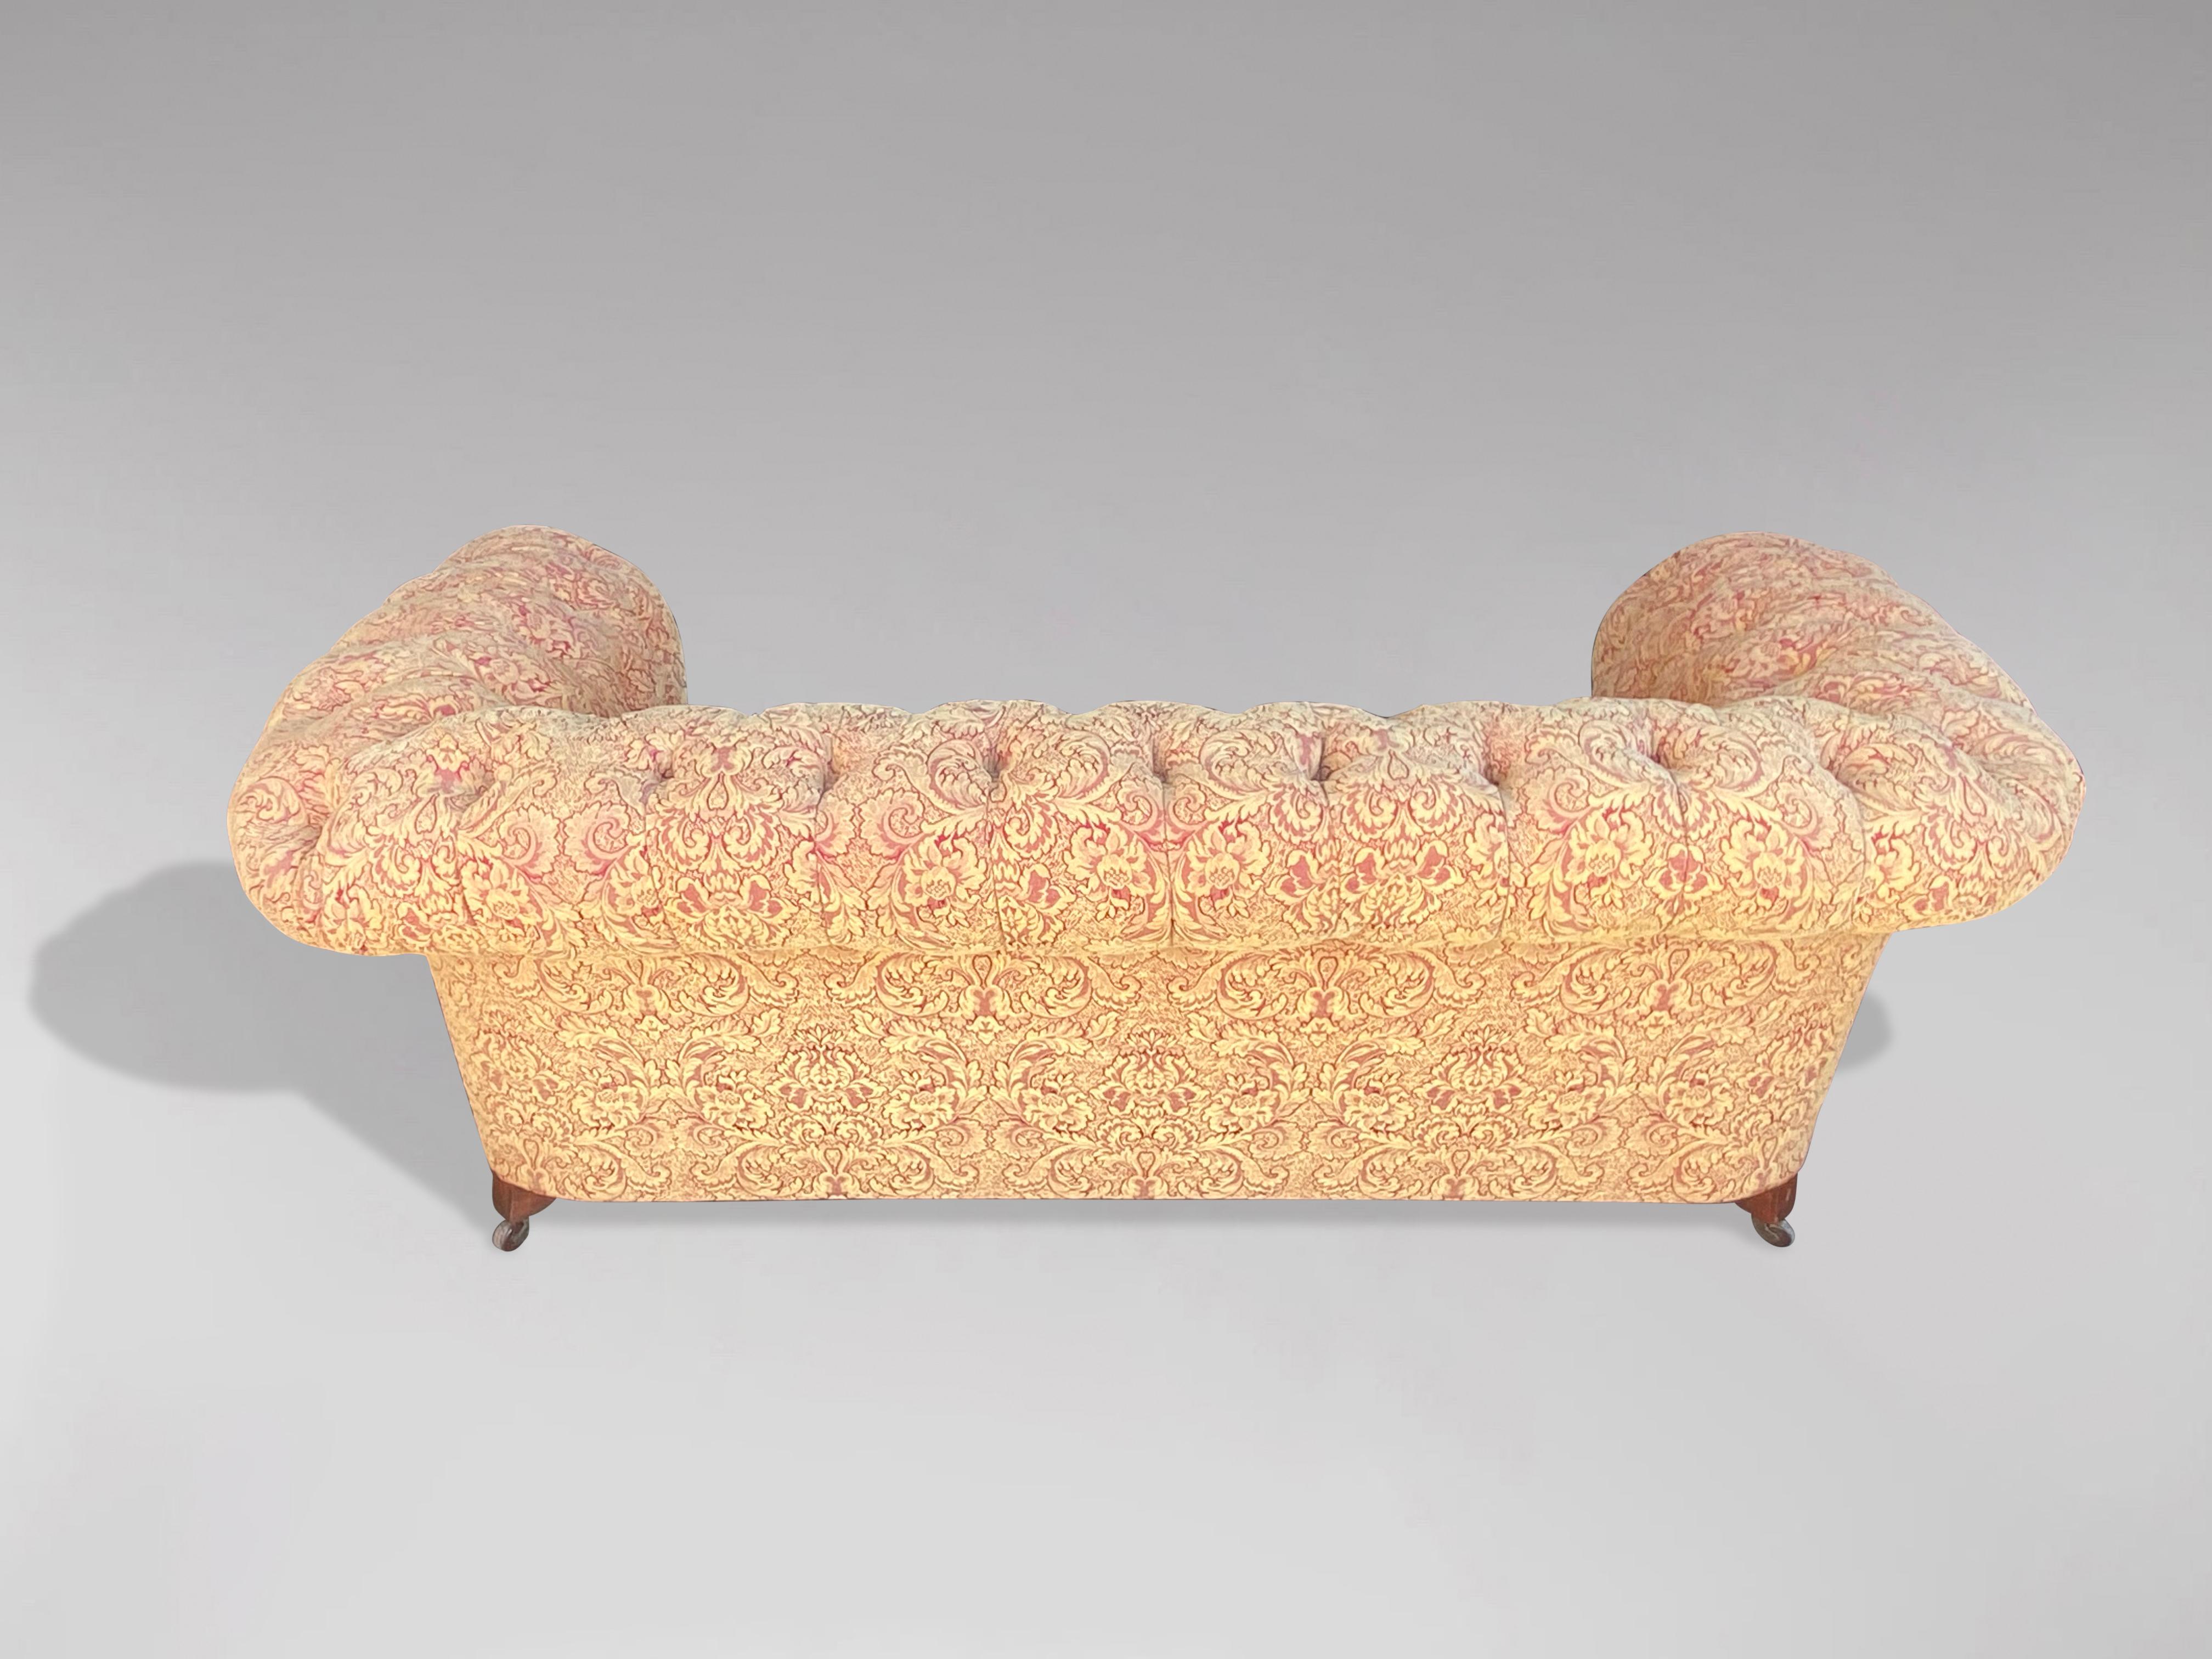 Hand-Crafted 19th Century Victorian Period Upholstered Chesterfield Sofa